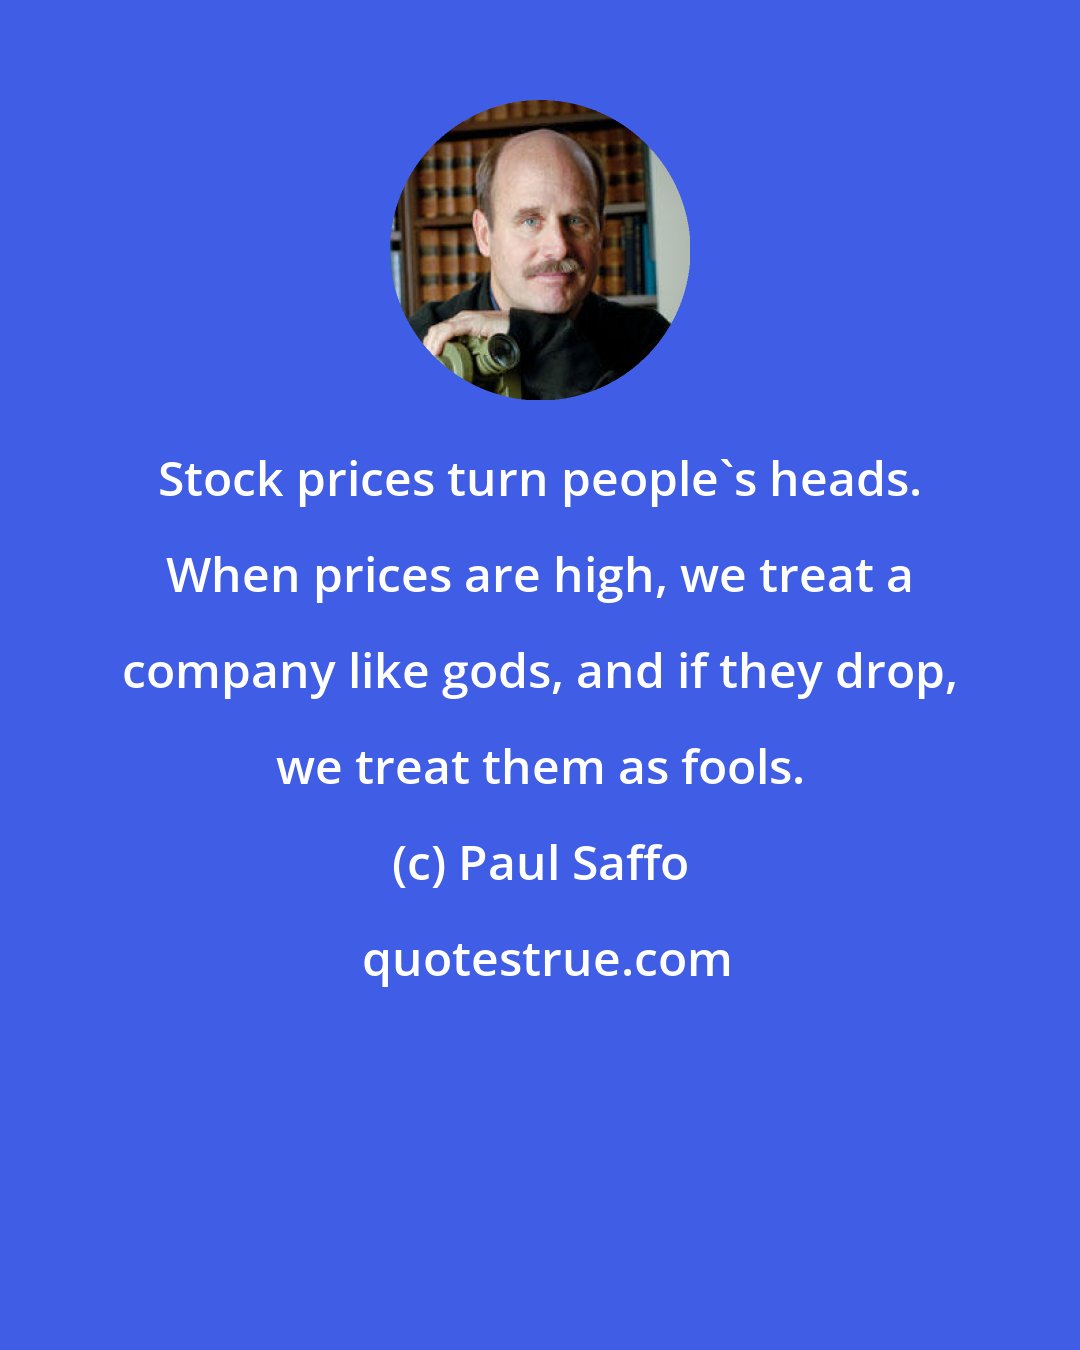 Paul Saffo: Stock prices turn people's heads. When prices are high, we treat a company like gods, and if they drop, we treat them as fools.